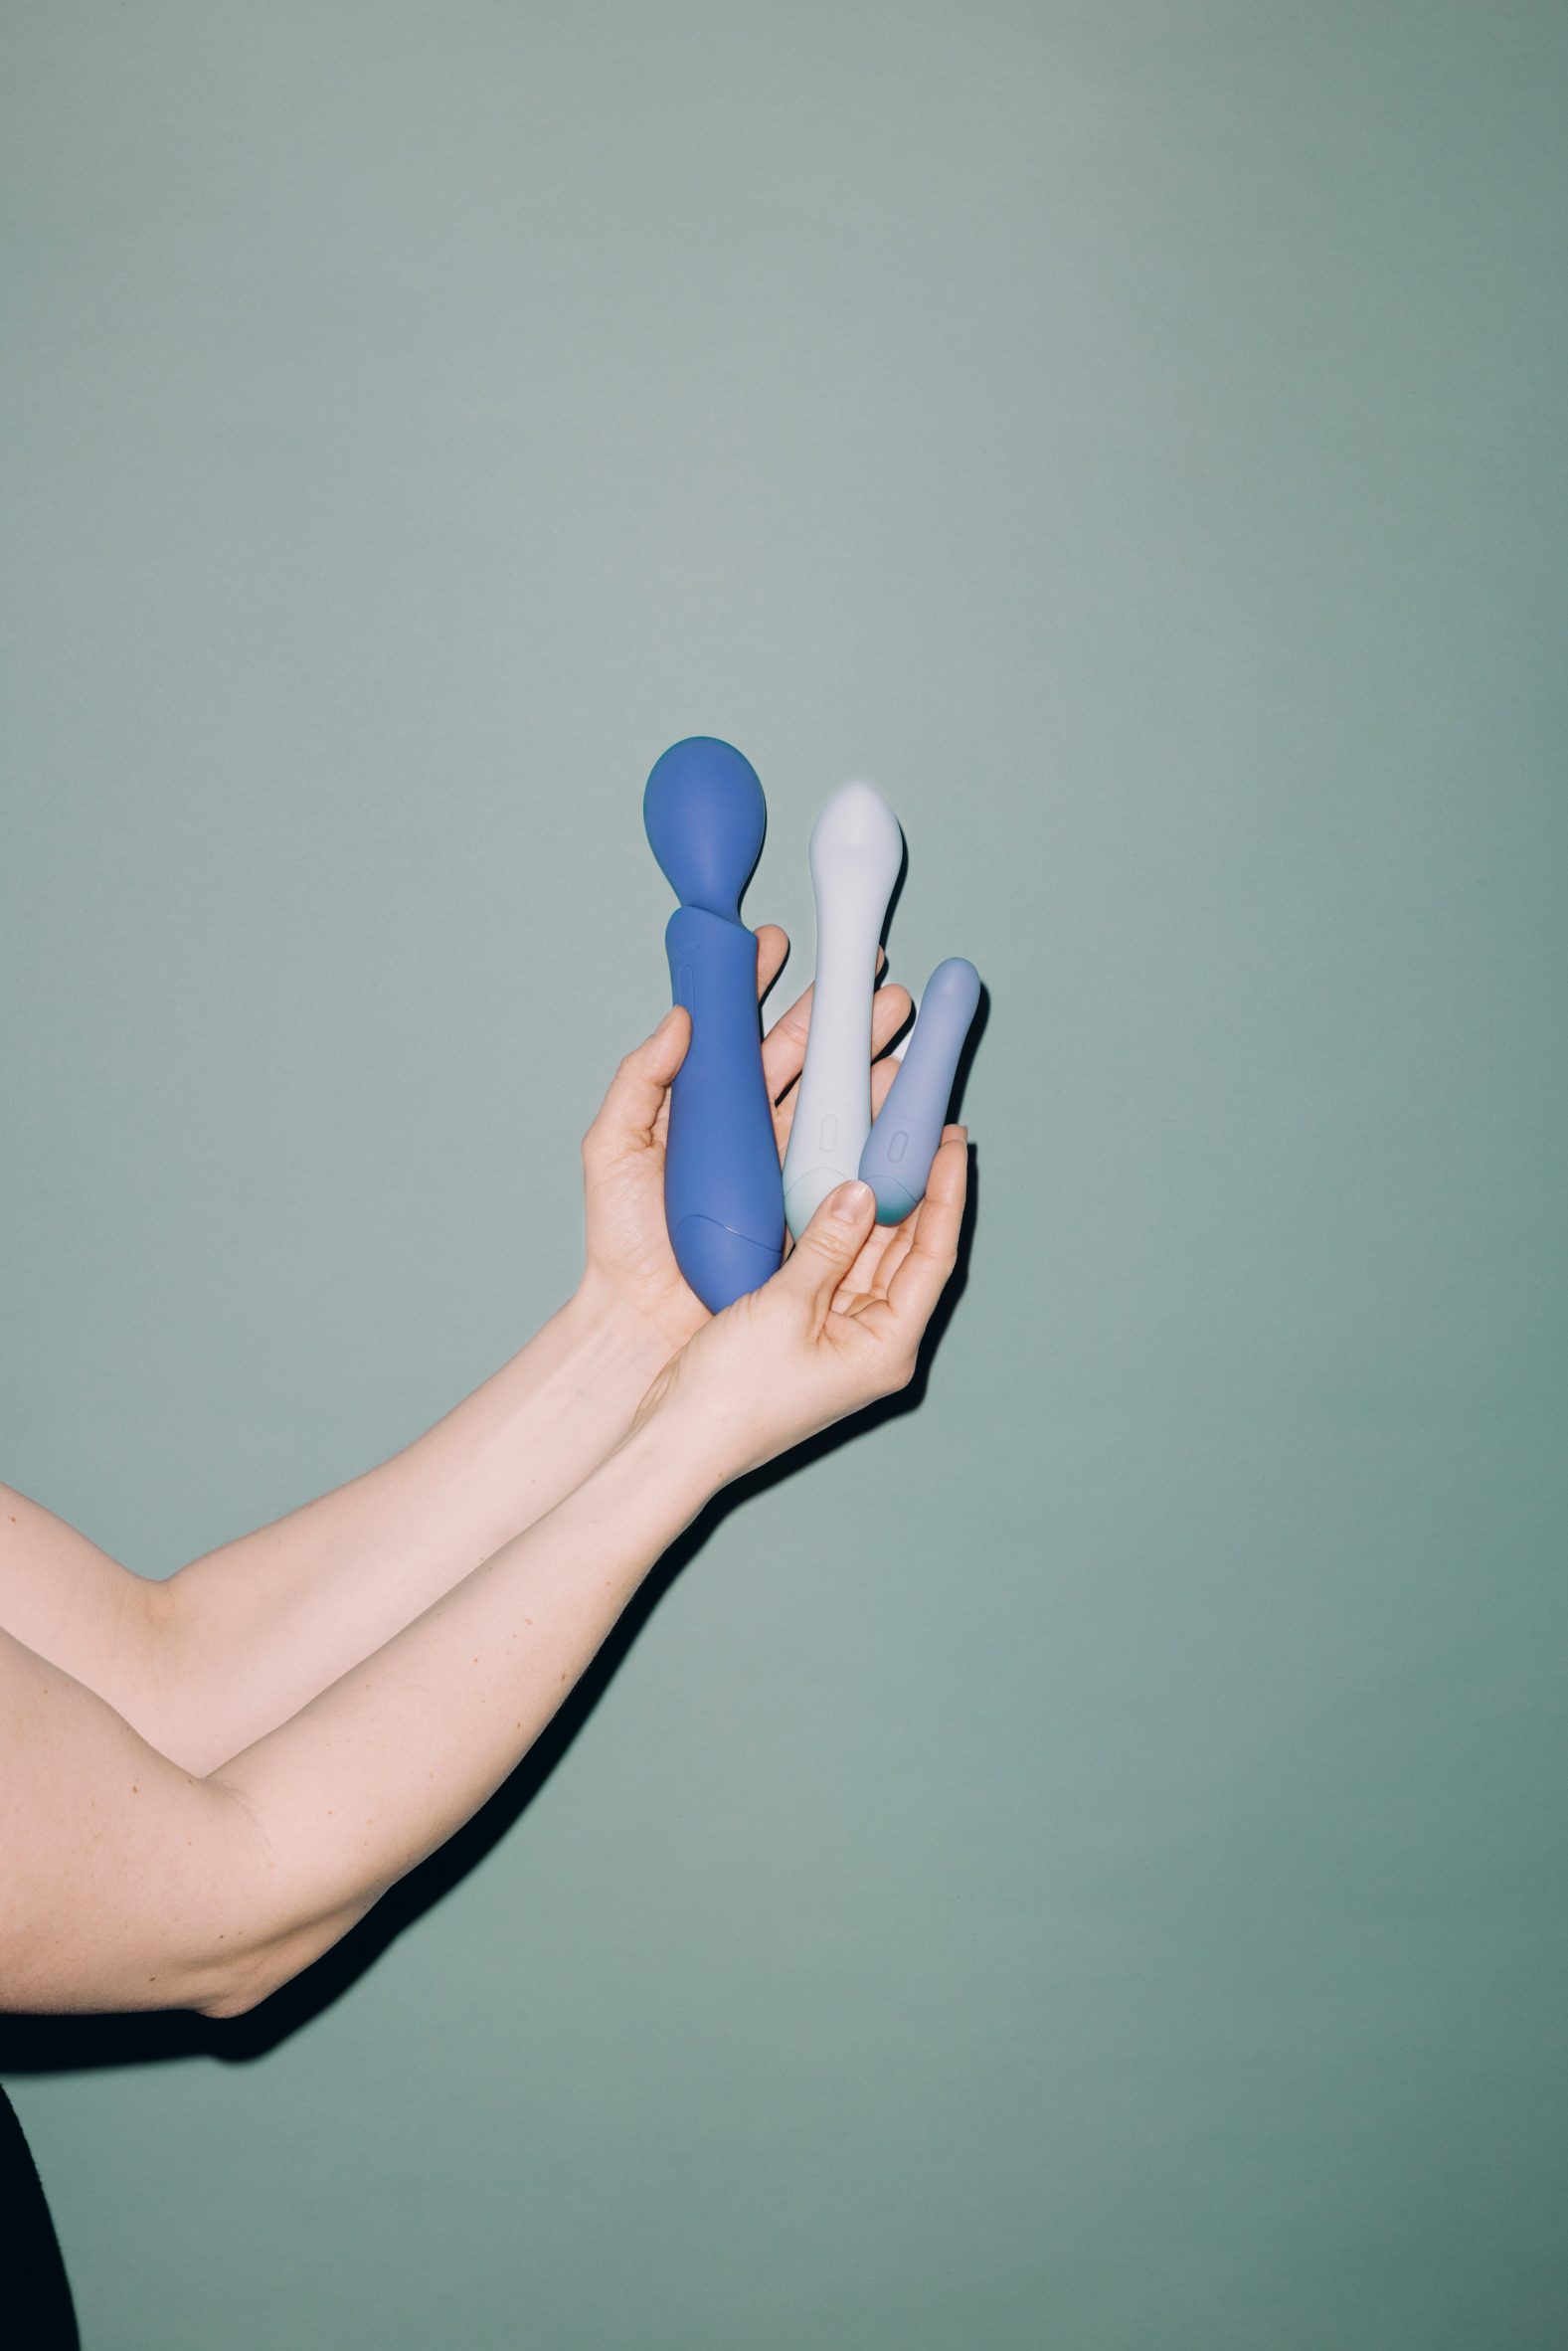 Ohhcean sex toys are made from recycled ocean plastic image